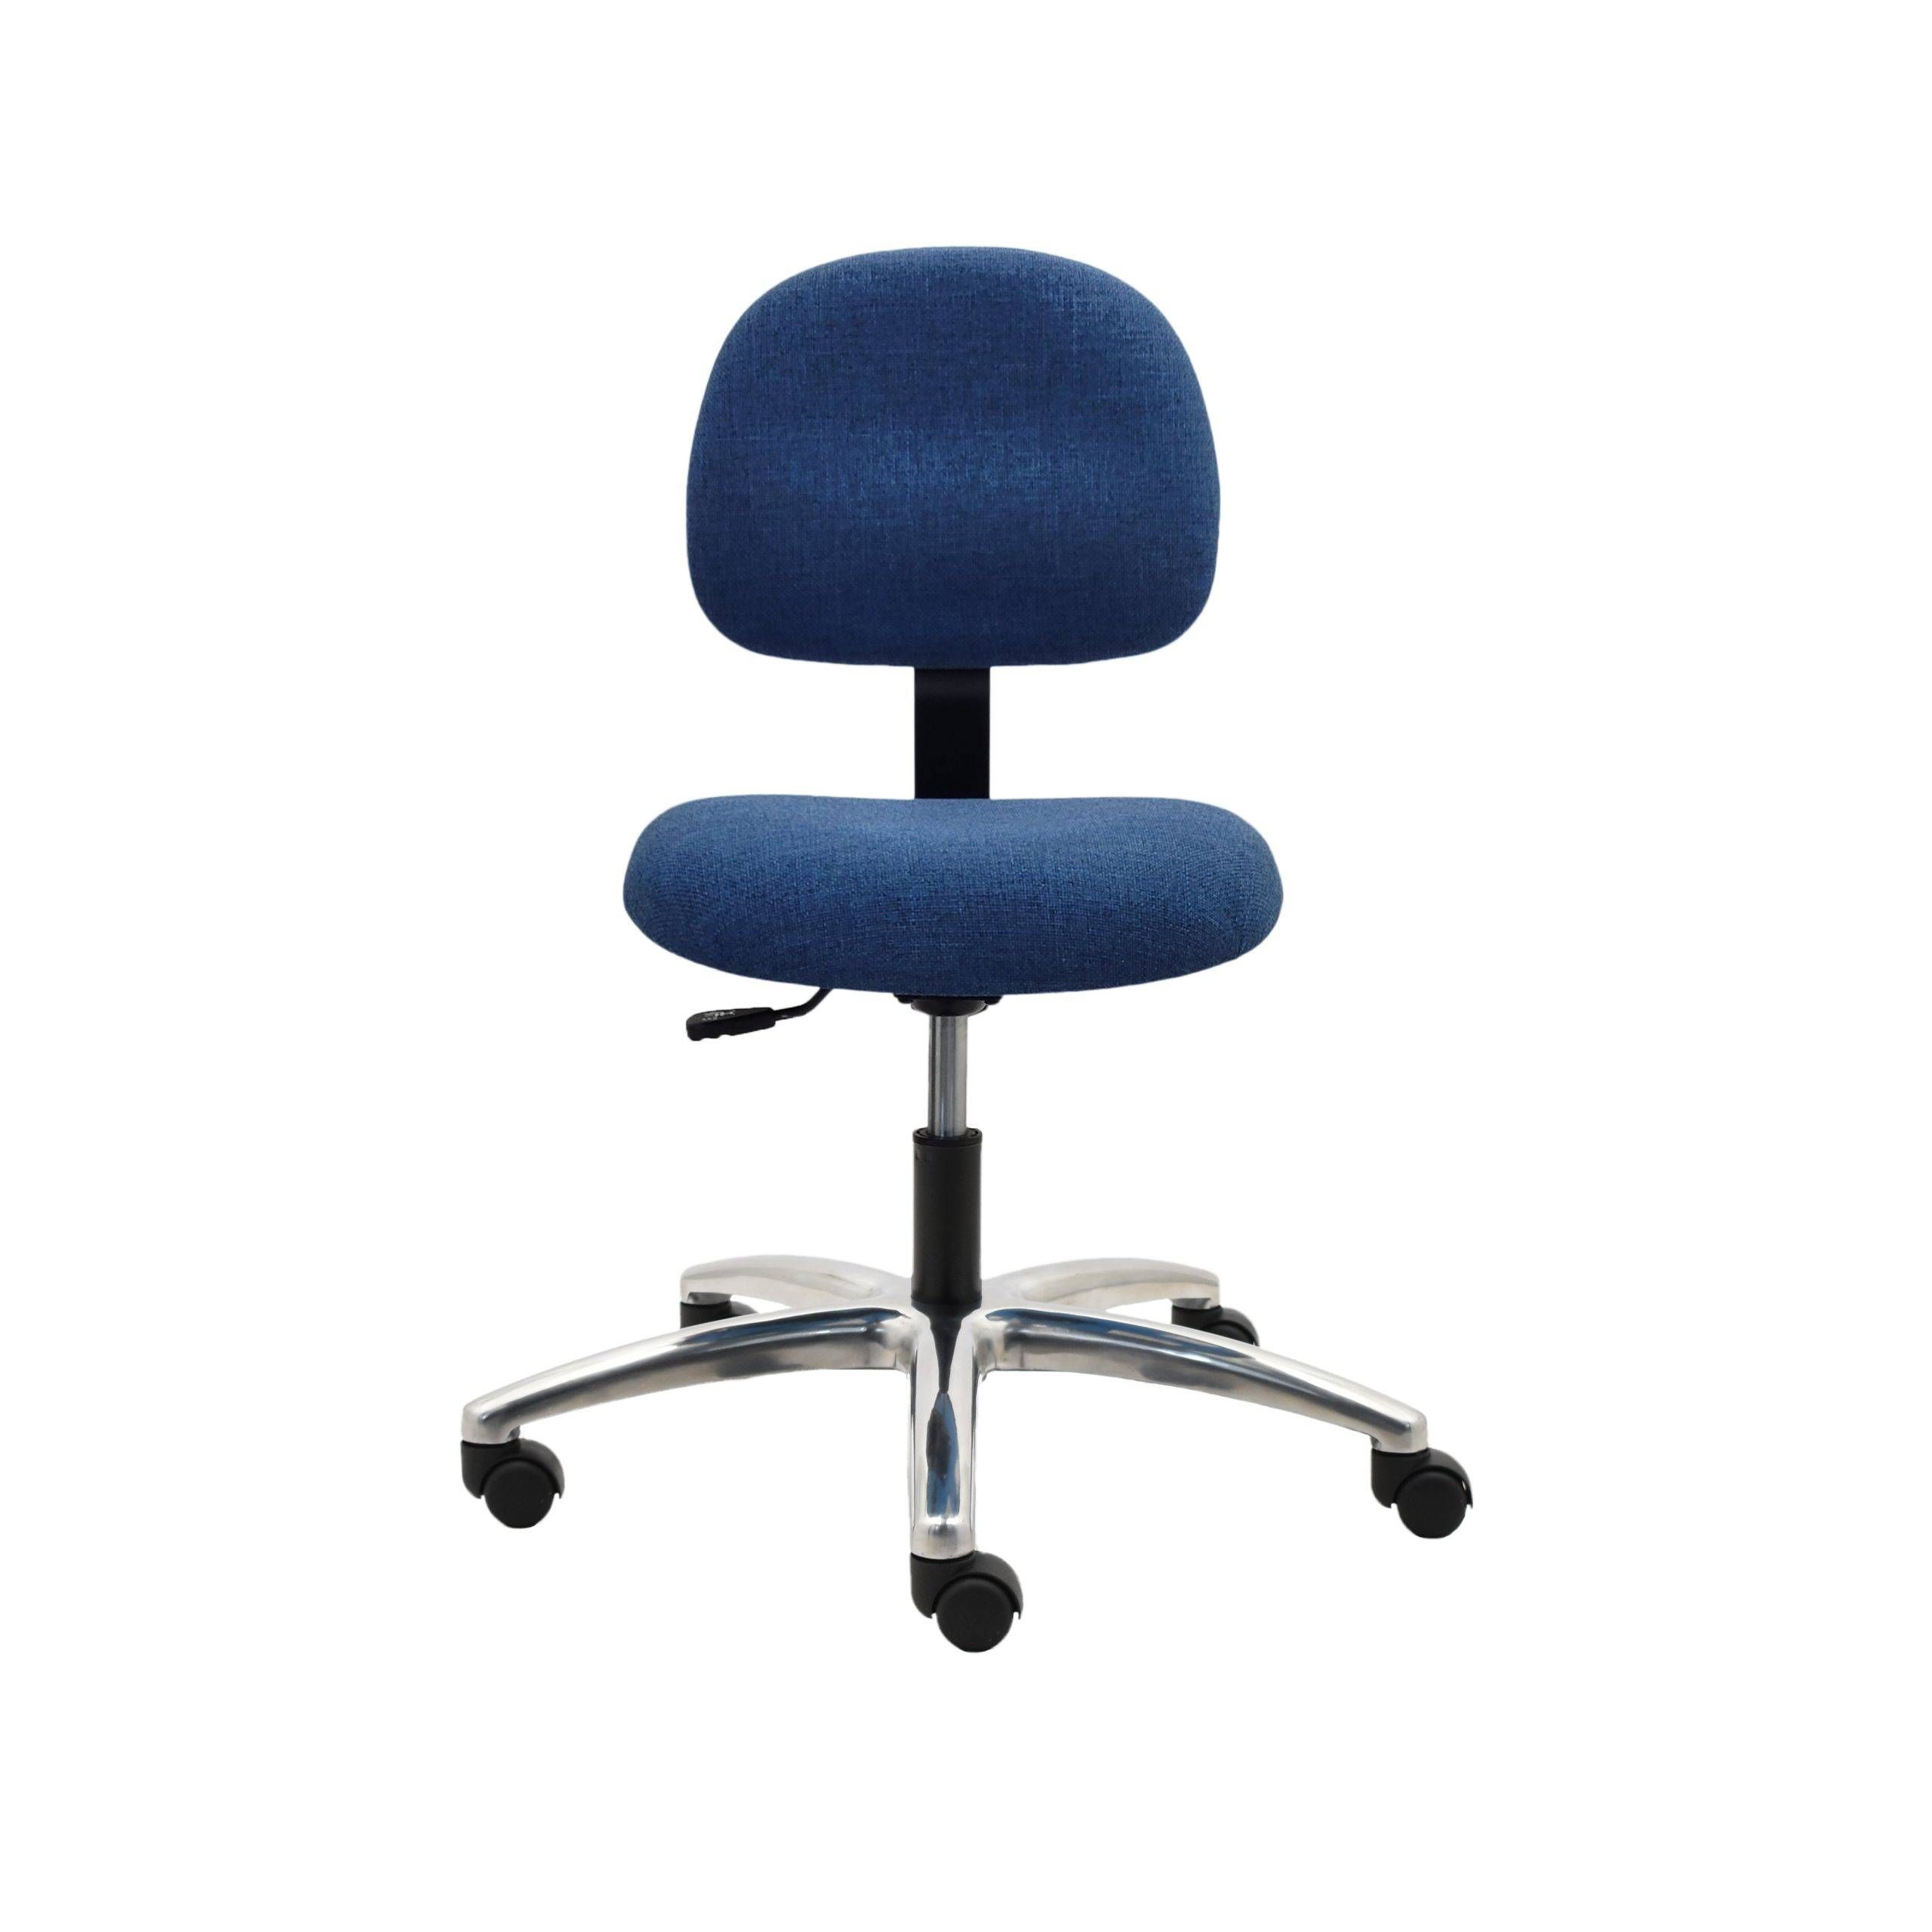 Desk Height Fabric Chair A62-F